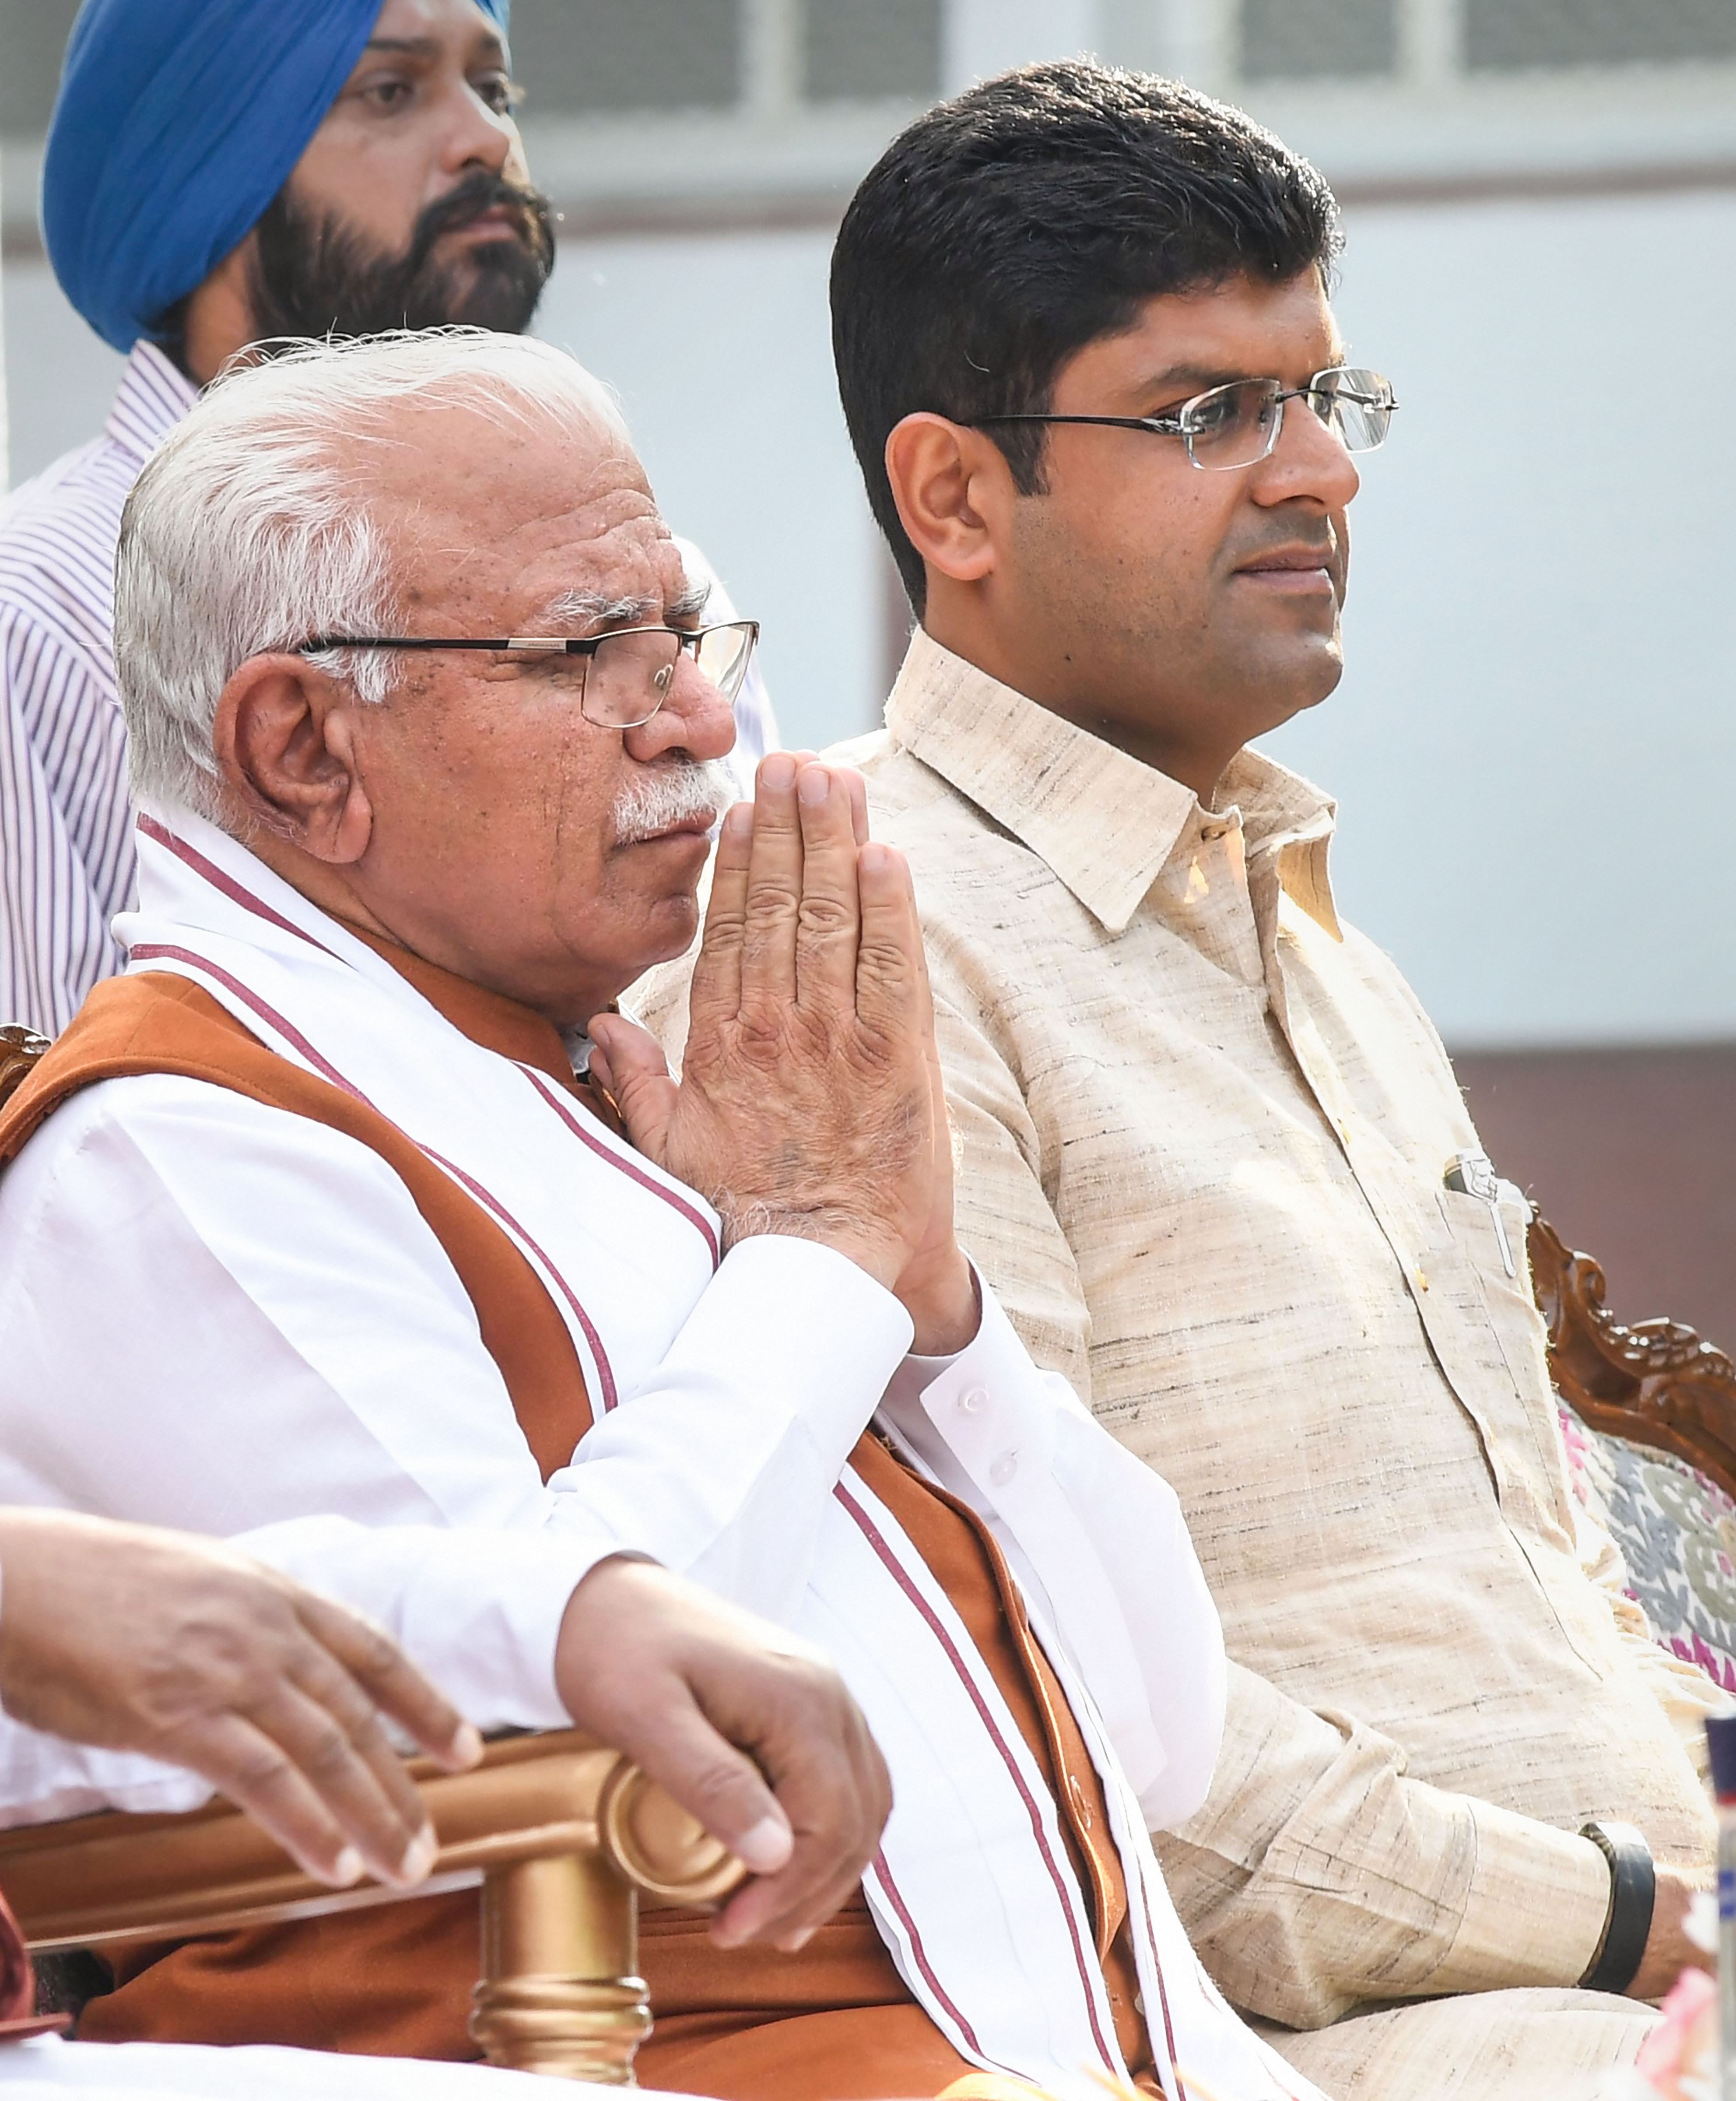 Haryanas chief minister Manohar Lal Khattar and deputy chief minister Dushyant Chautala after taking oath during a swearing-in ceremony, in Chandigarh, Sunday, October 27, 2019.